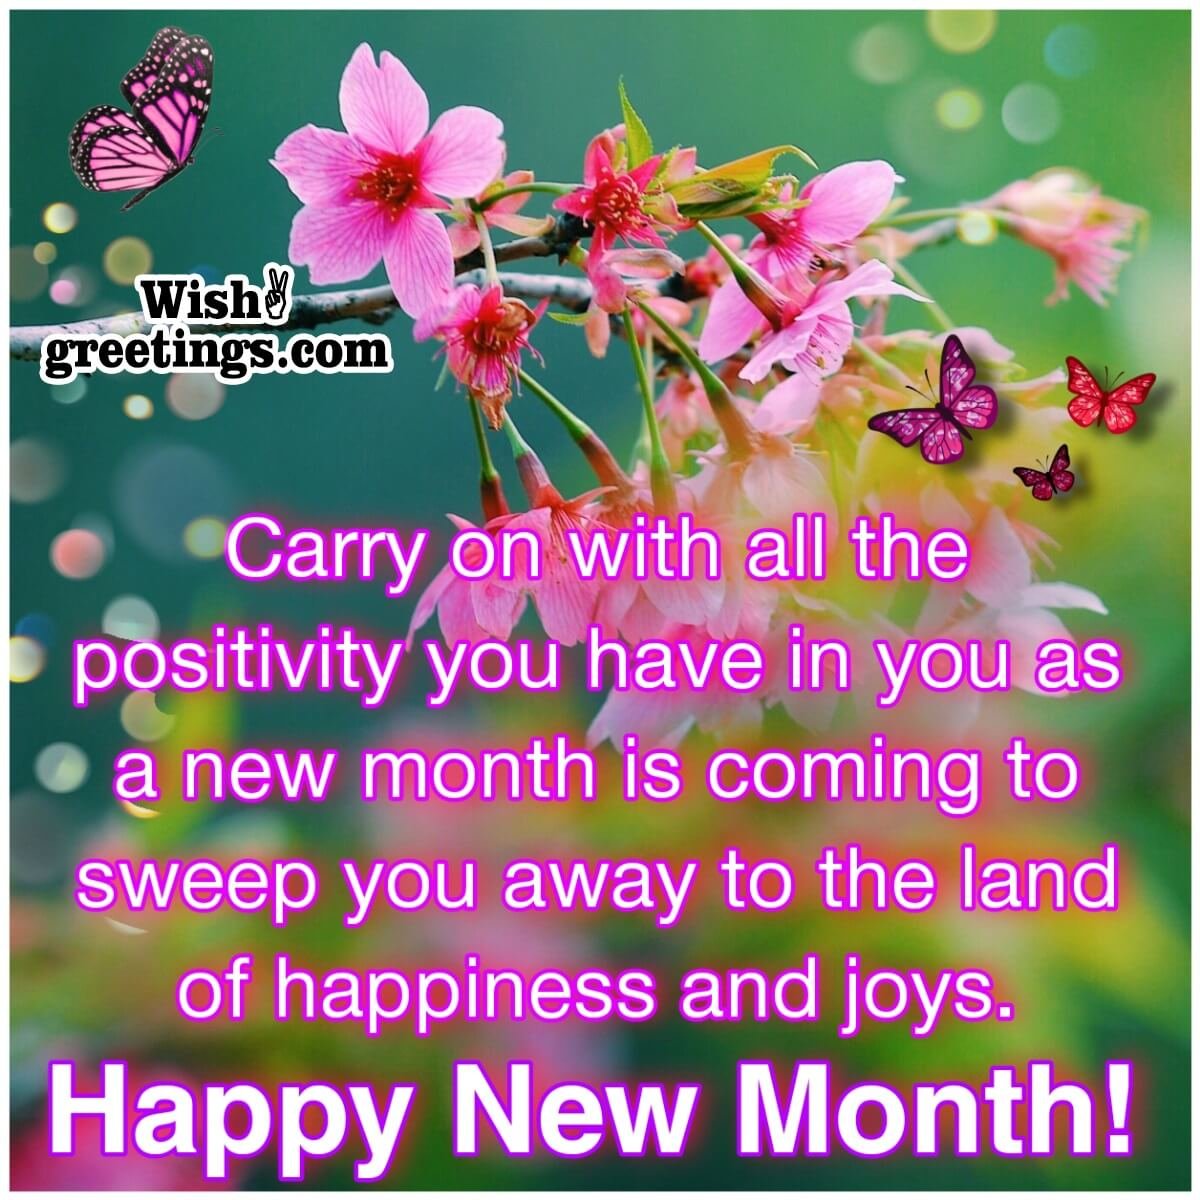 Happy New Month Messages - Wish Greetings